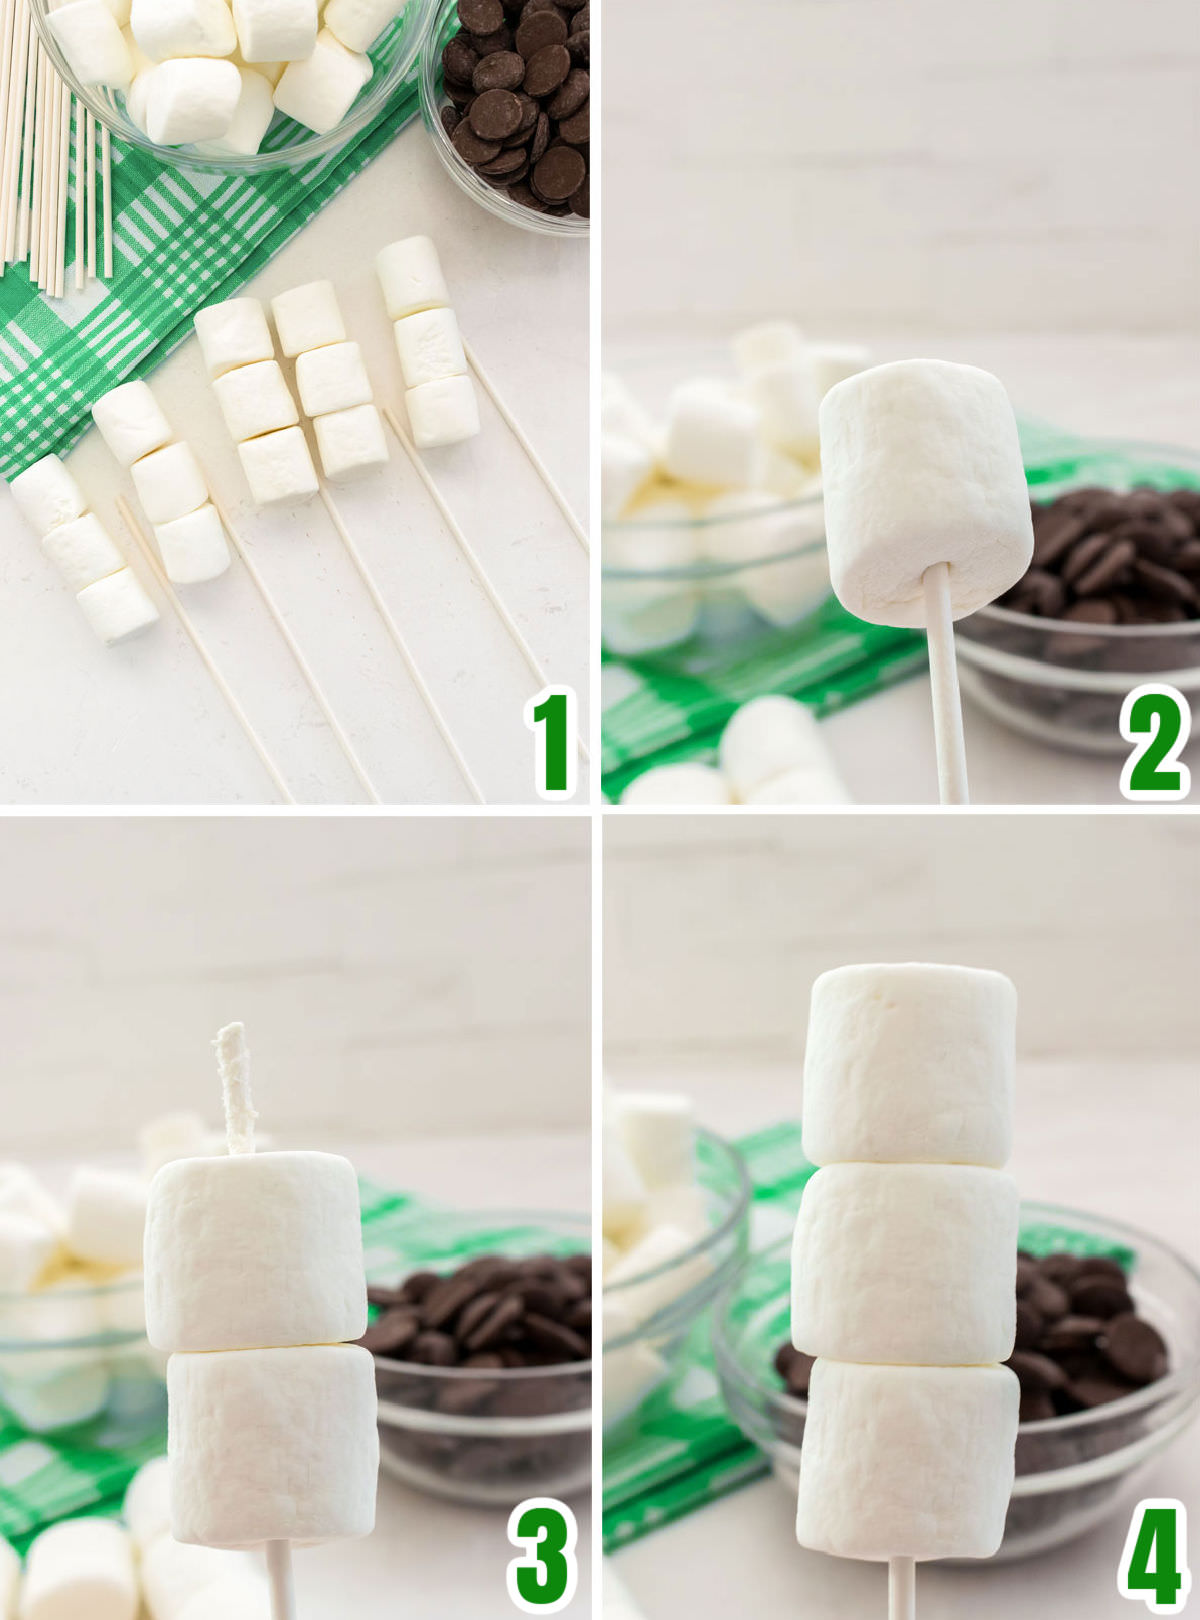 Collage image showing how to create the marshmallow pop using marshmallows and a lollipop stick.